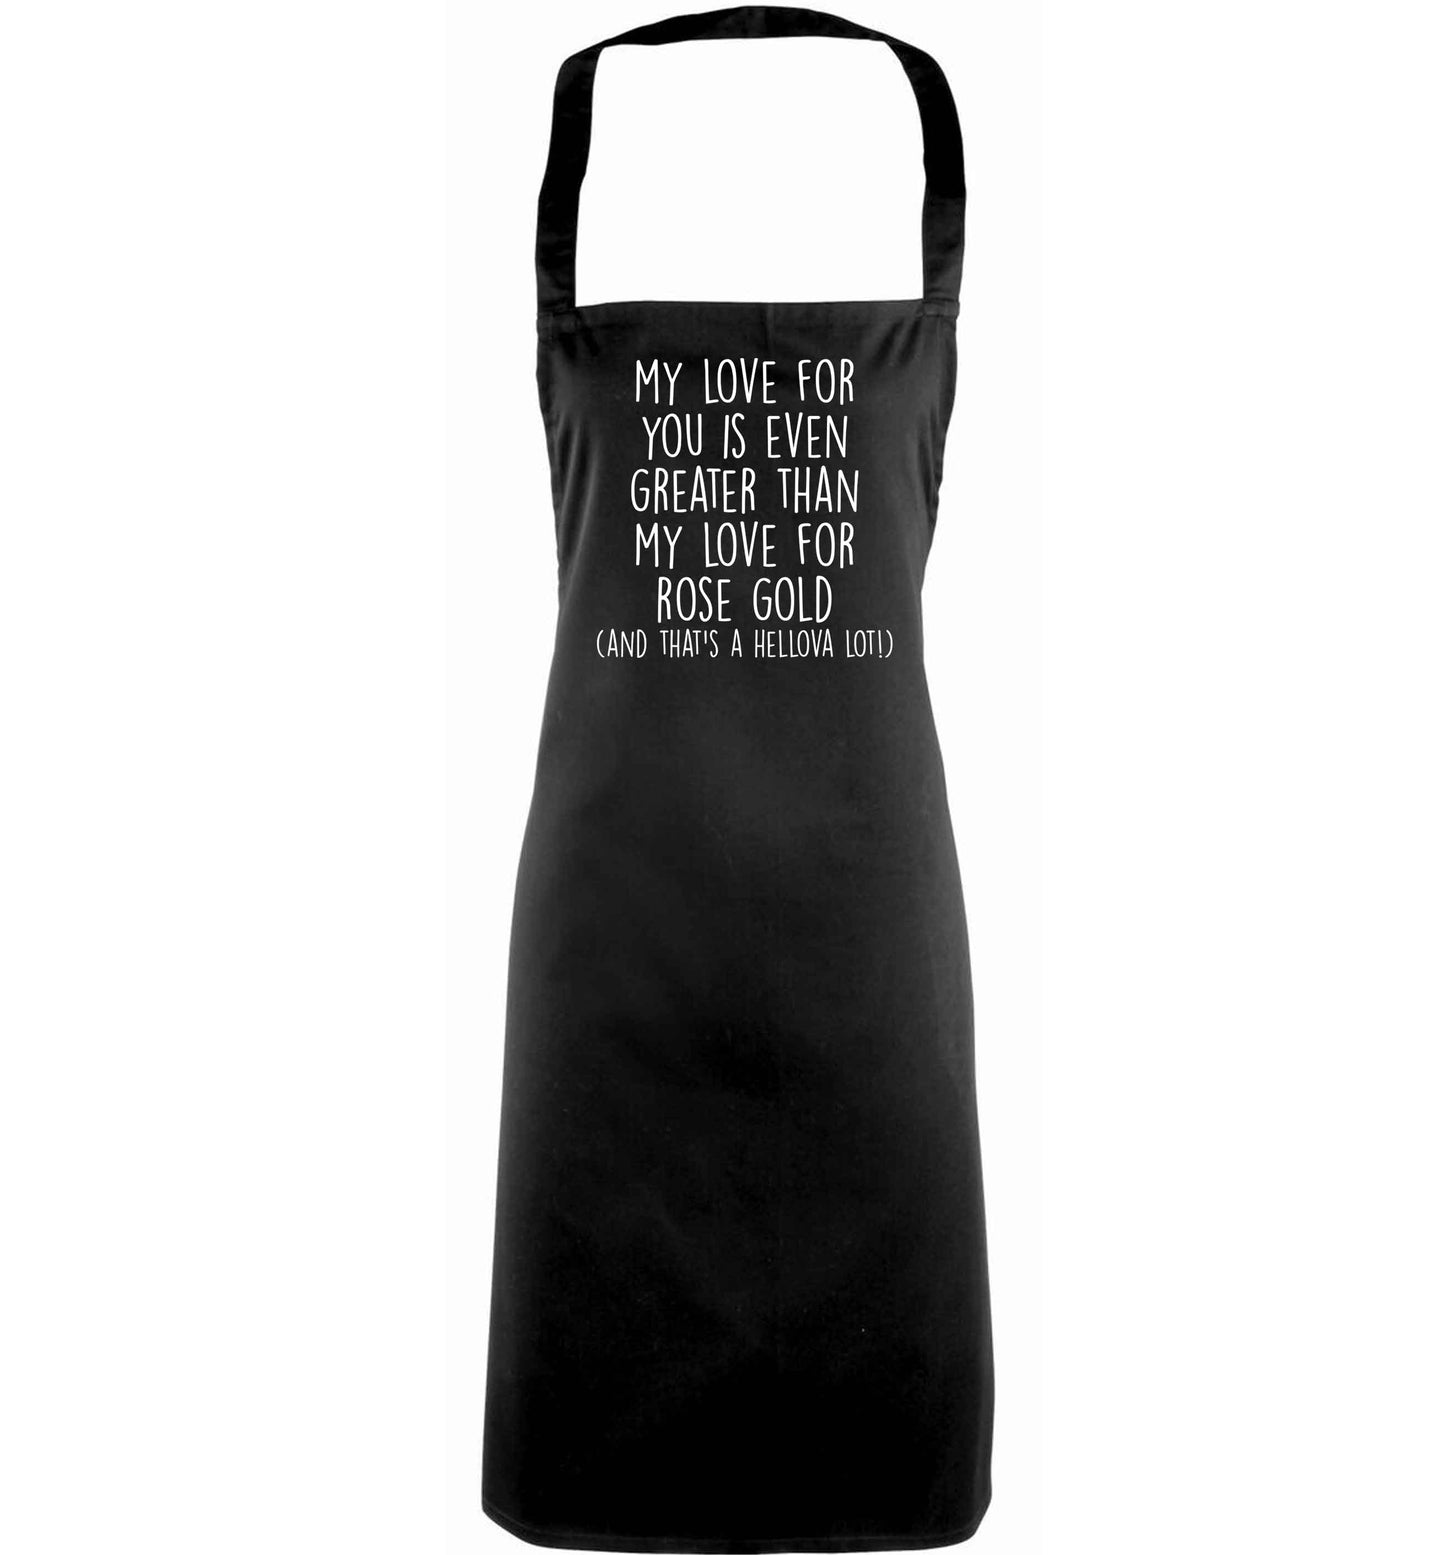 My love for you is even greater than my love for rose gold (and that's a hellova lot) adults black apron